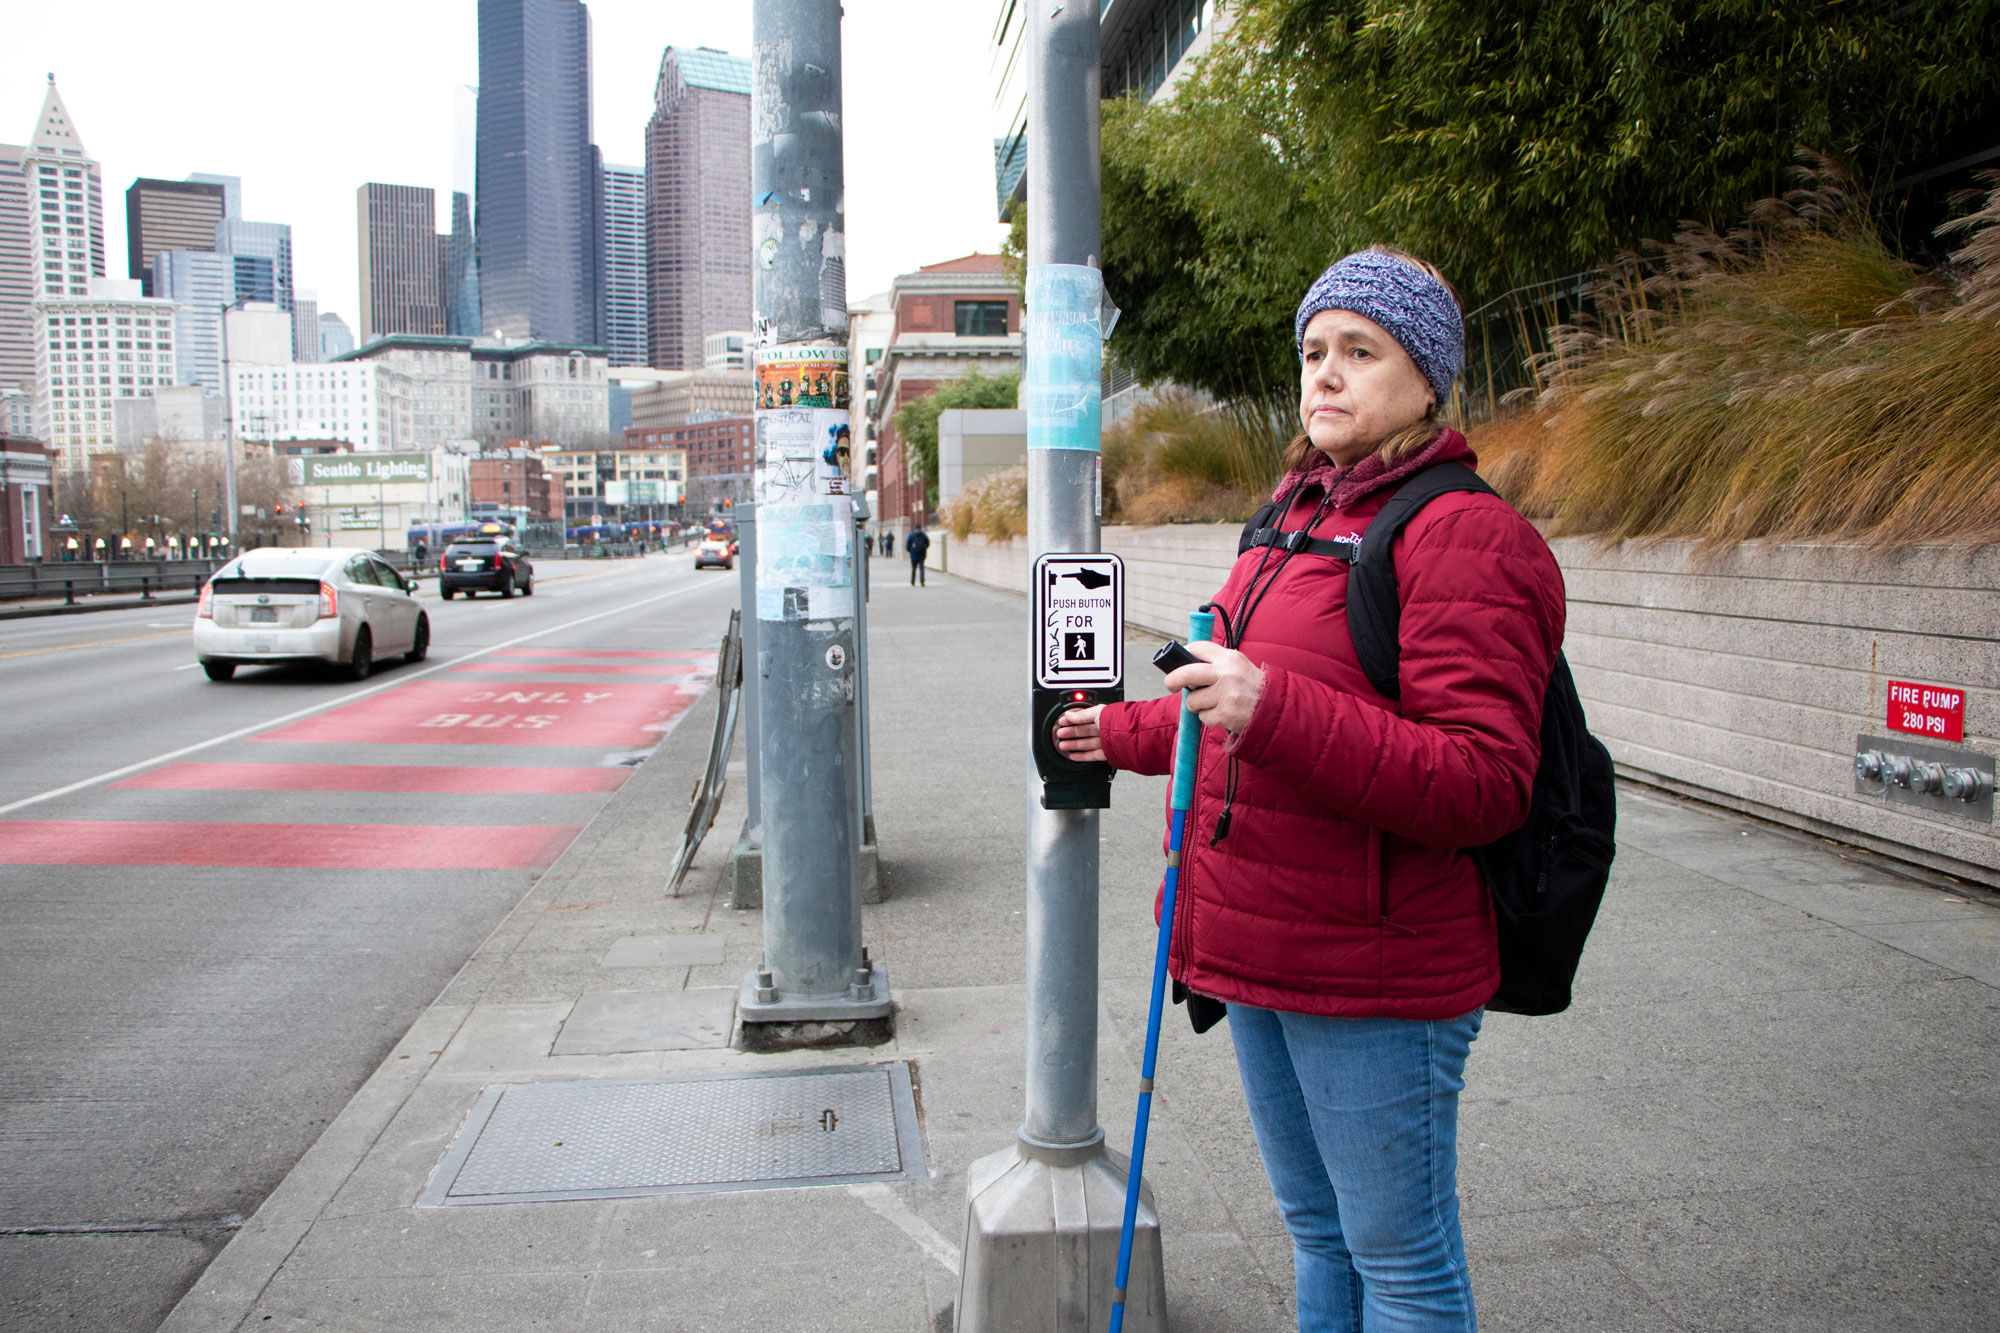 A woman stands at a street corner, with her hand on the accessible pedestrian signal, holding a white cane and a mini guide in her other hand.